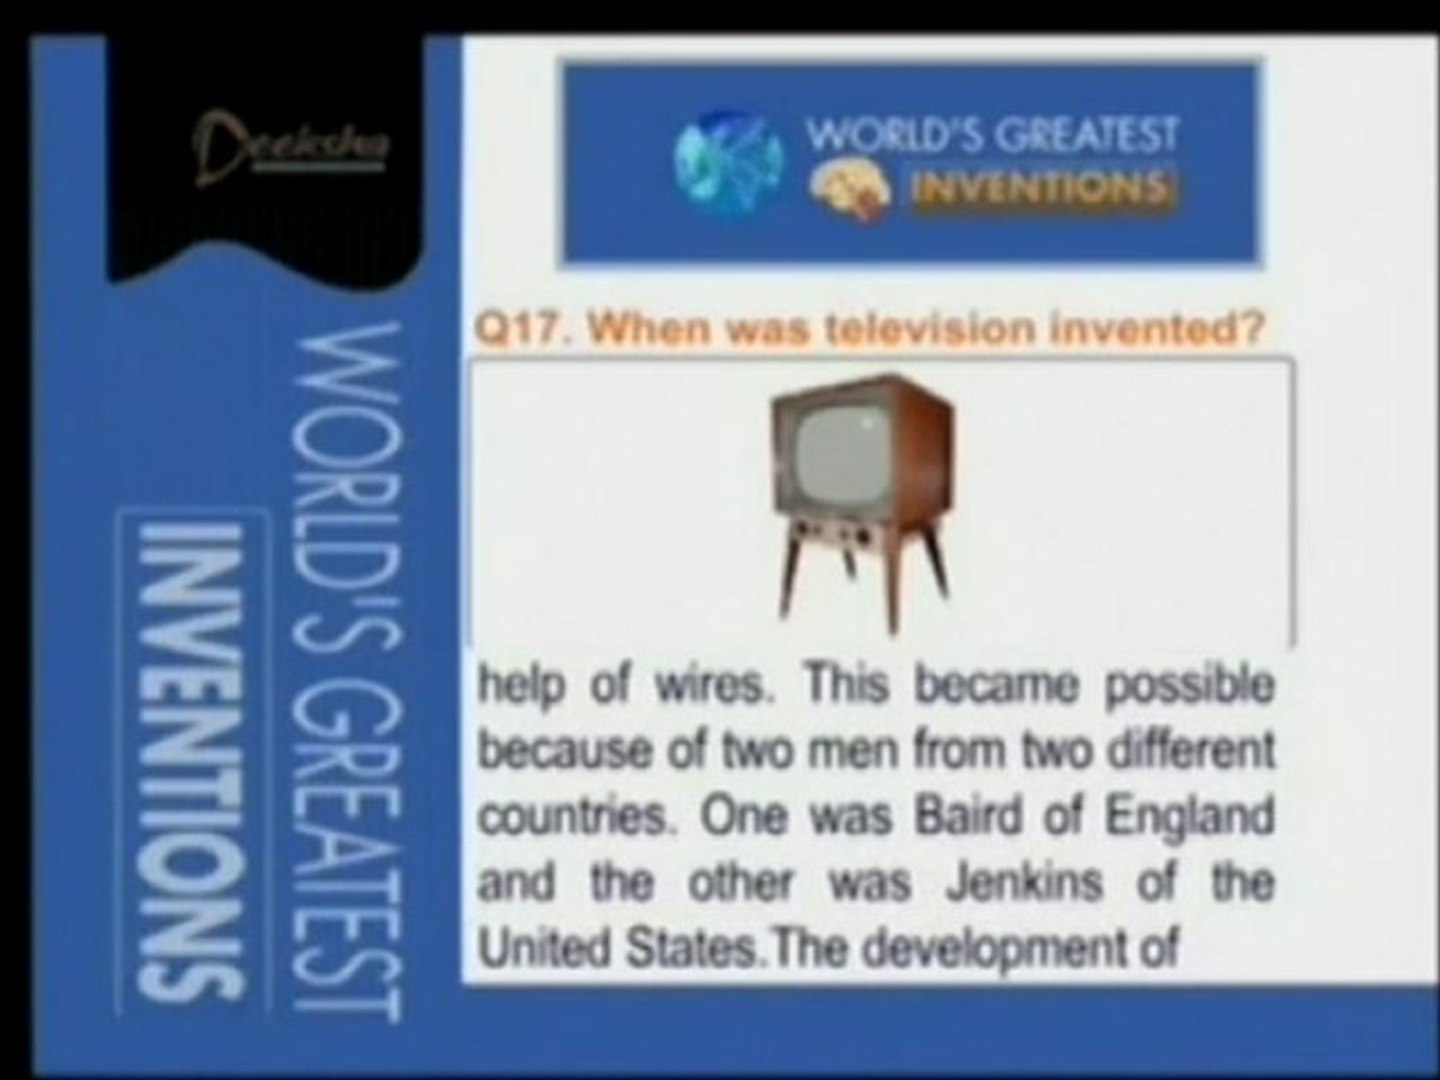 World’s Greatest Inventions